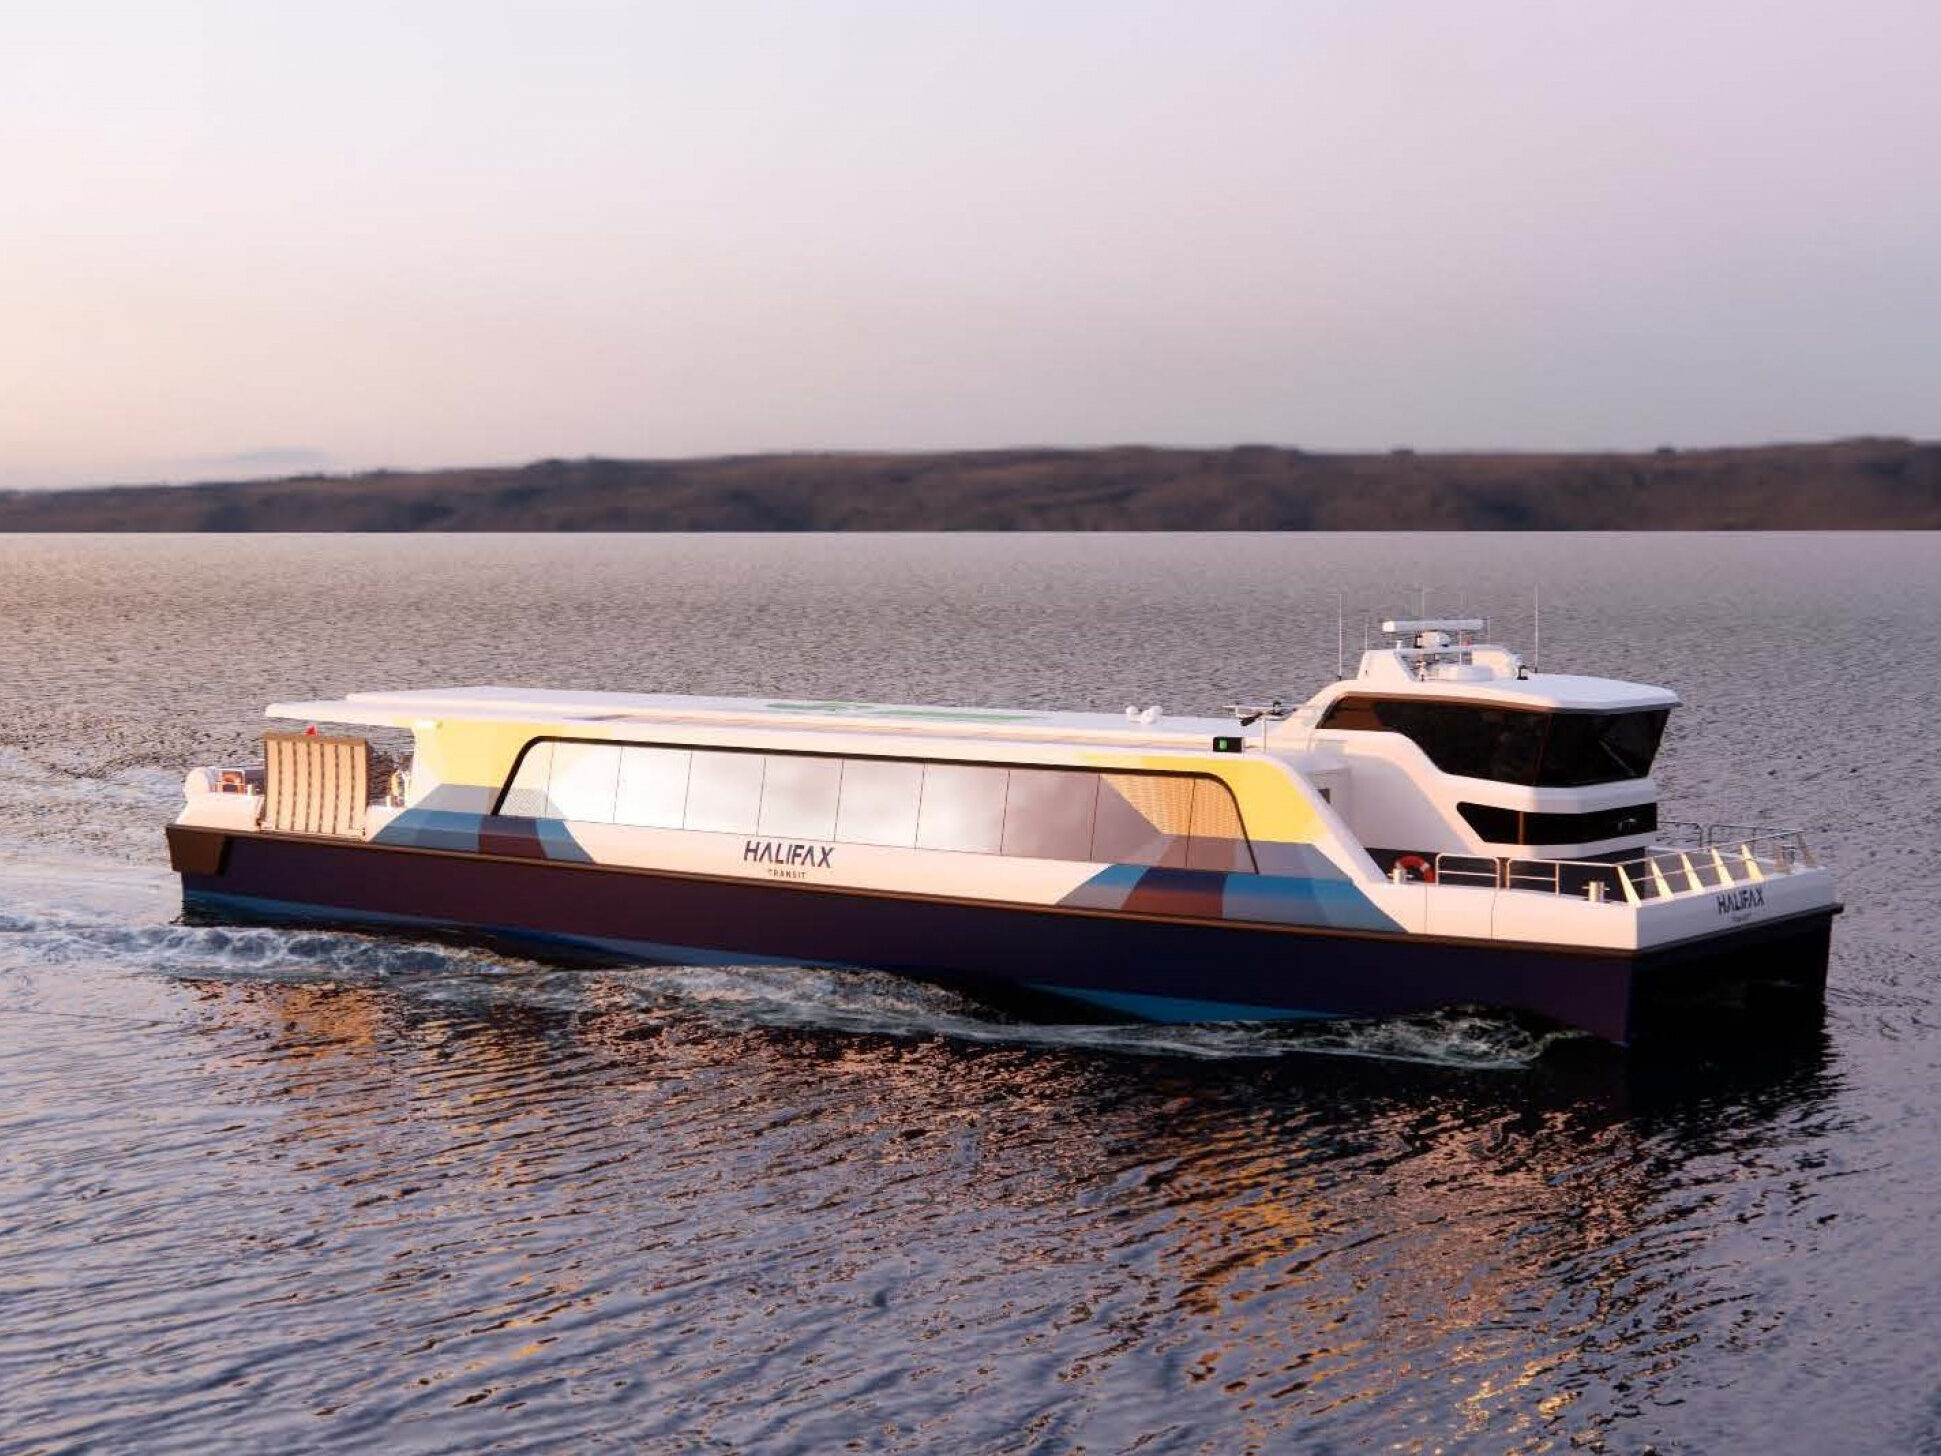 Canada: Halifax Transit to Acquire Electric High-Speed Ferries